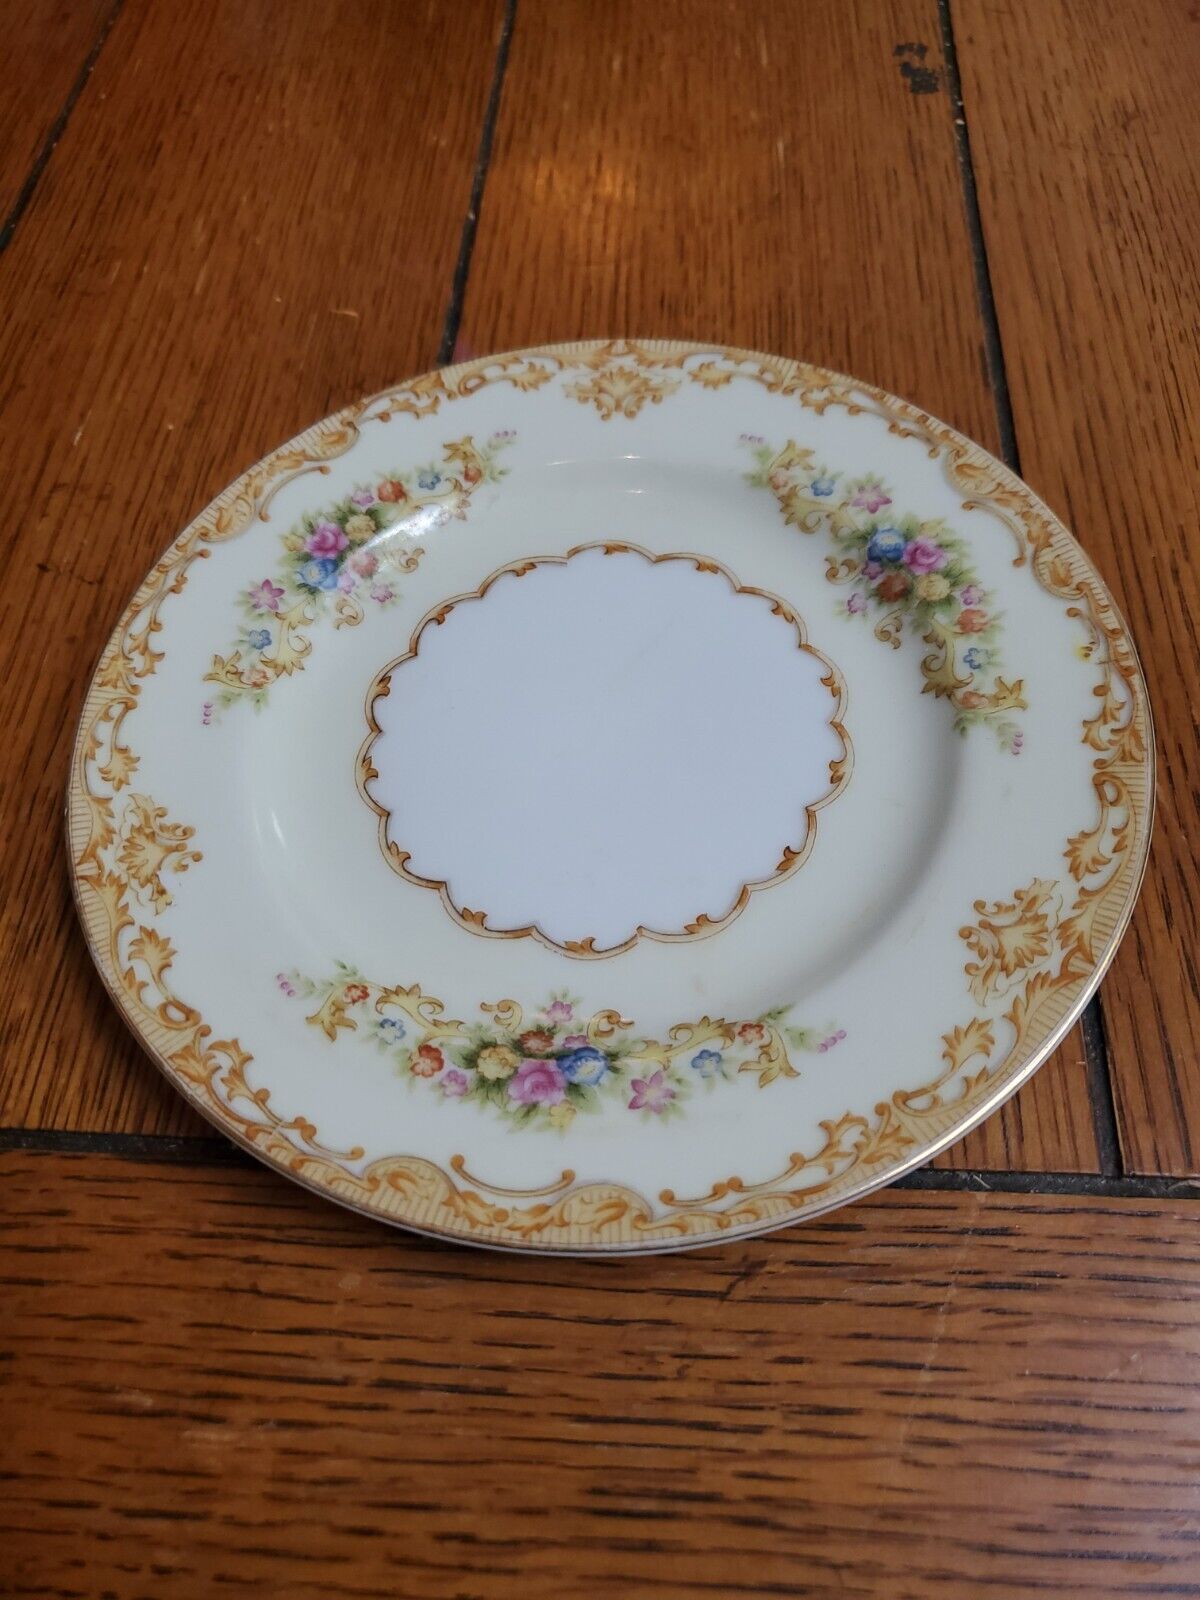 VINTAGE JYOTO CHINA OCCUPIED JAPAN FLORAL DESSERT/BREAD AND BUTTER PLATE 6 INCH